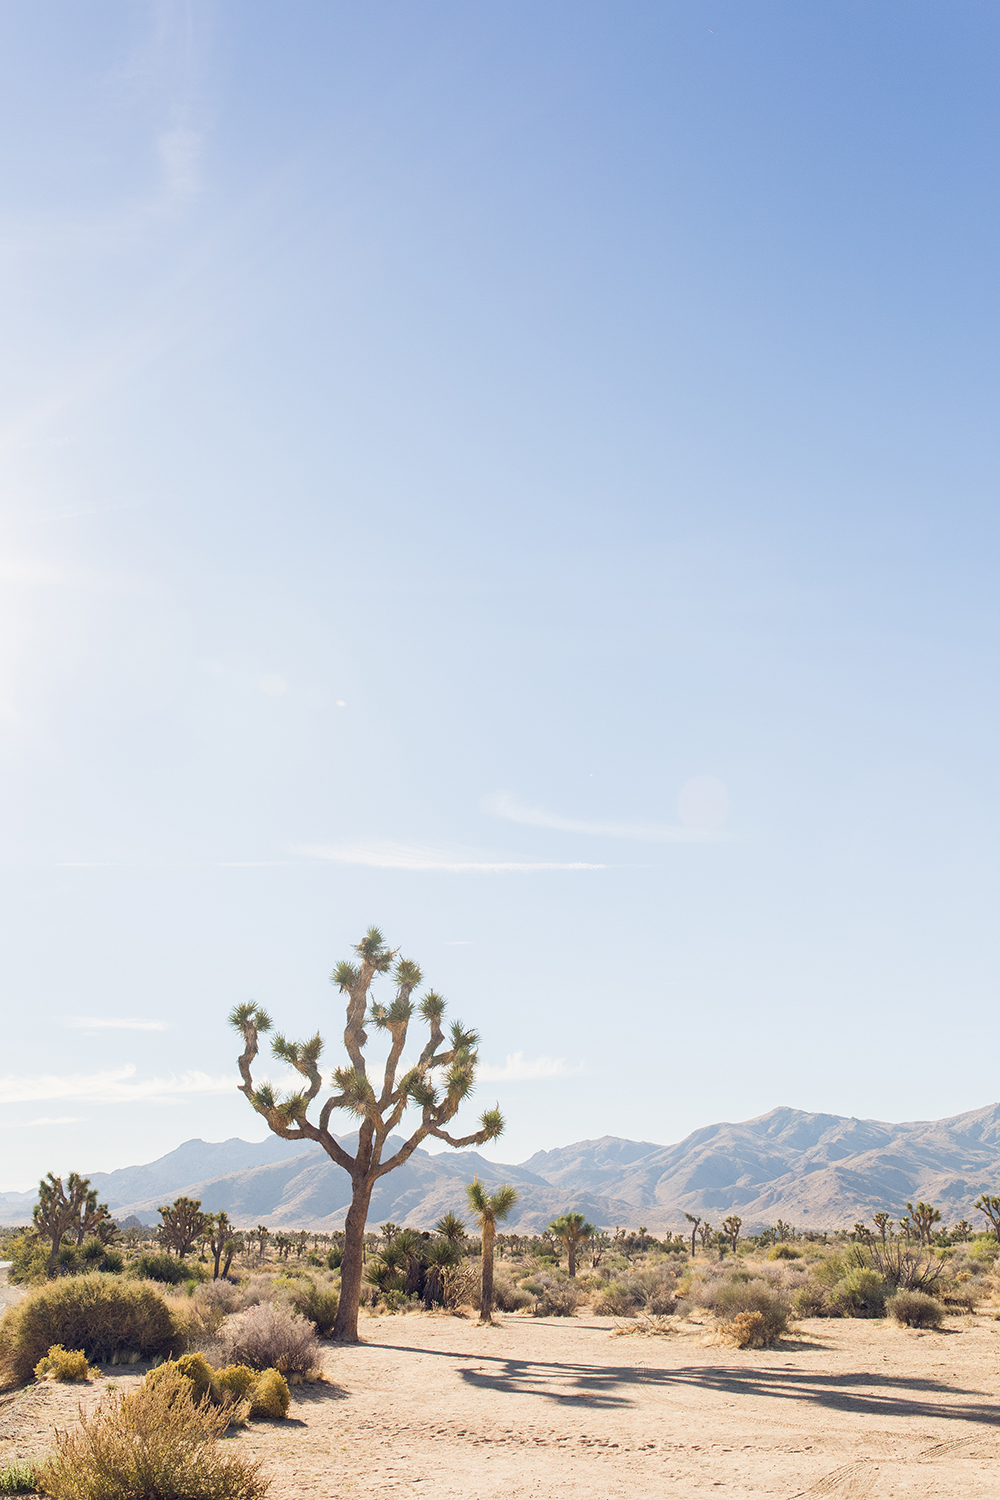 Joshua Tree National Park and Palm Springs, California are in my top 10 favorite beautiful places in the US to visit.